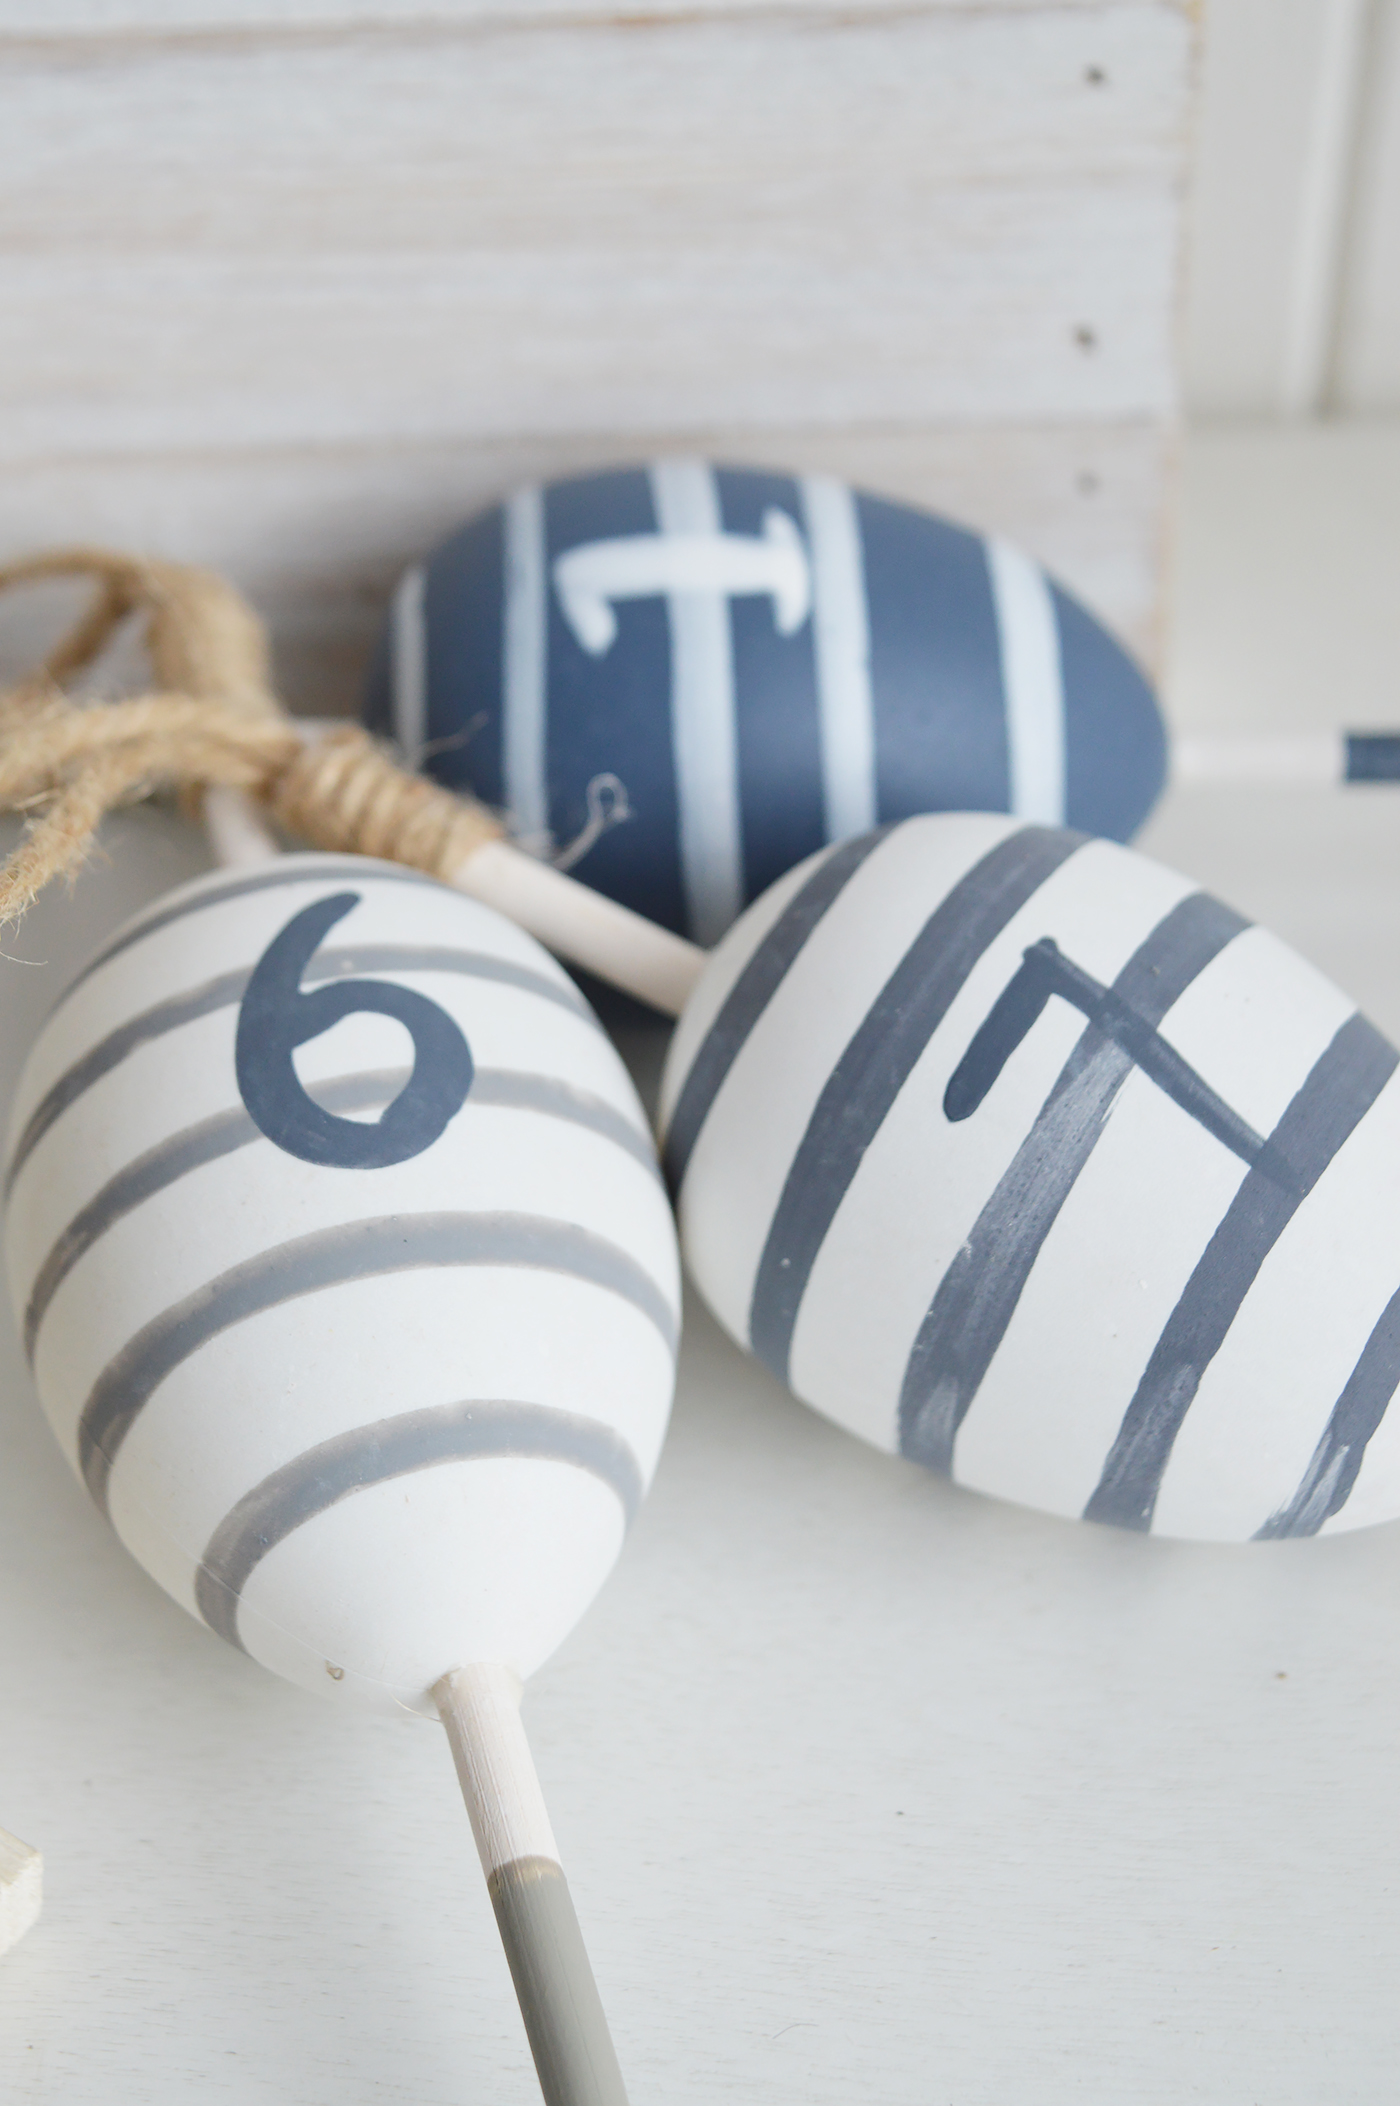 Nautical, coastal and beach home decor accessories and Furniture from The White Lighthouse Furniture - Set 3 decorative hanging floats. New England Coastal style interior design